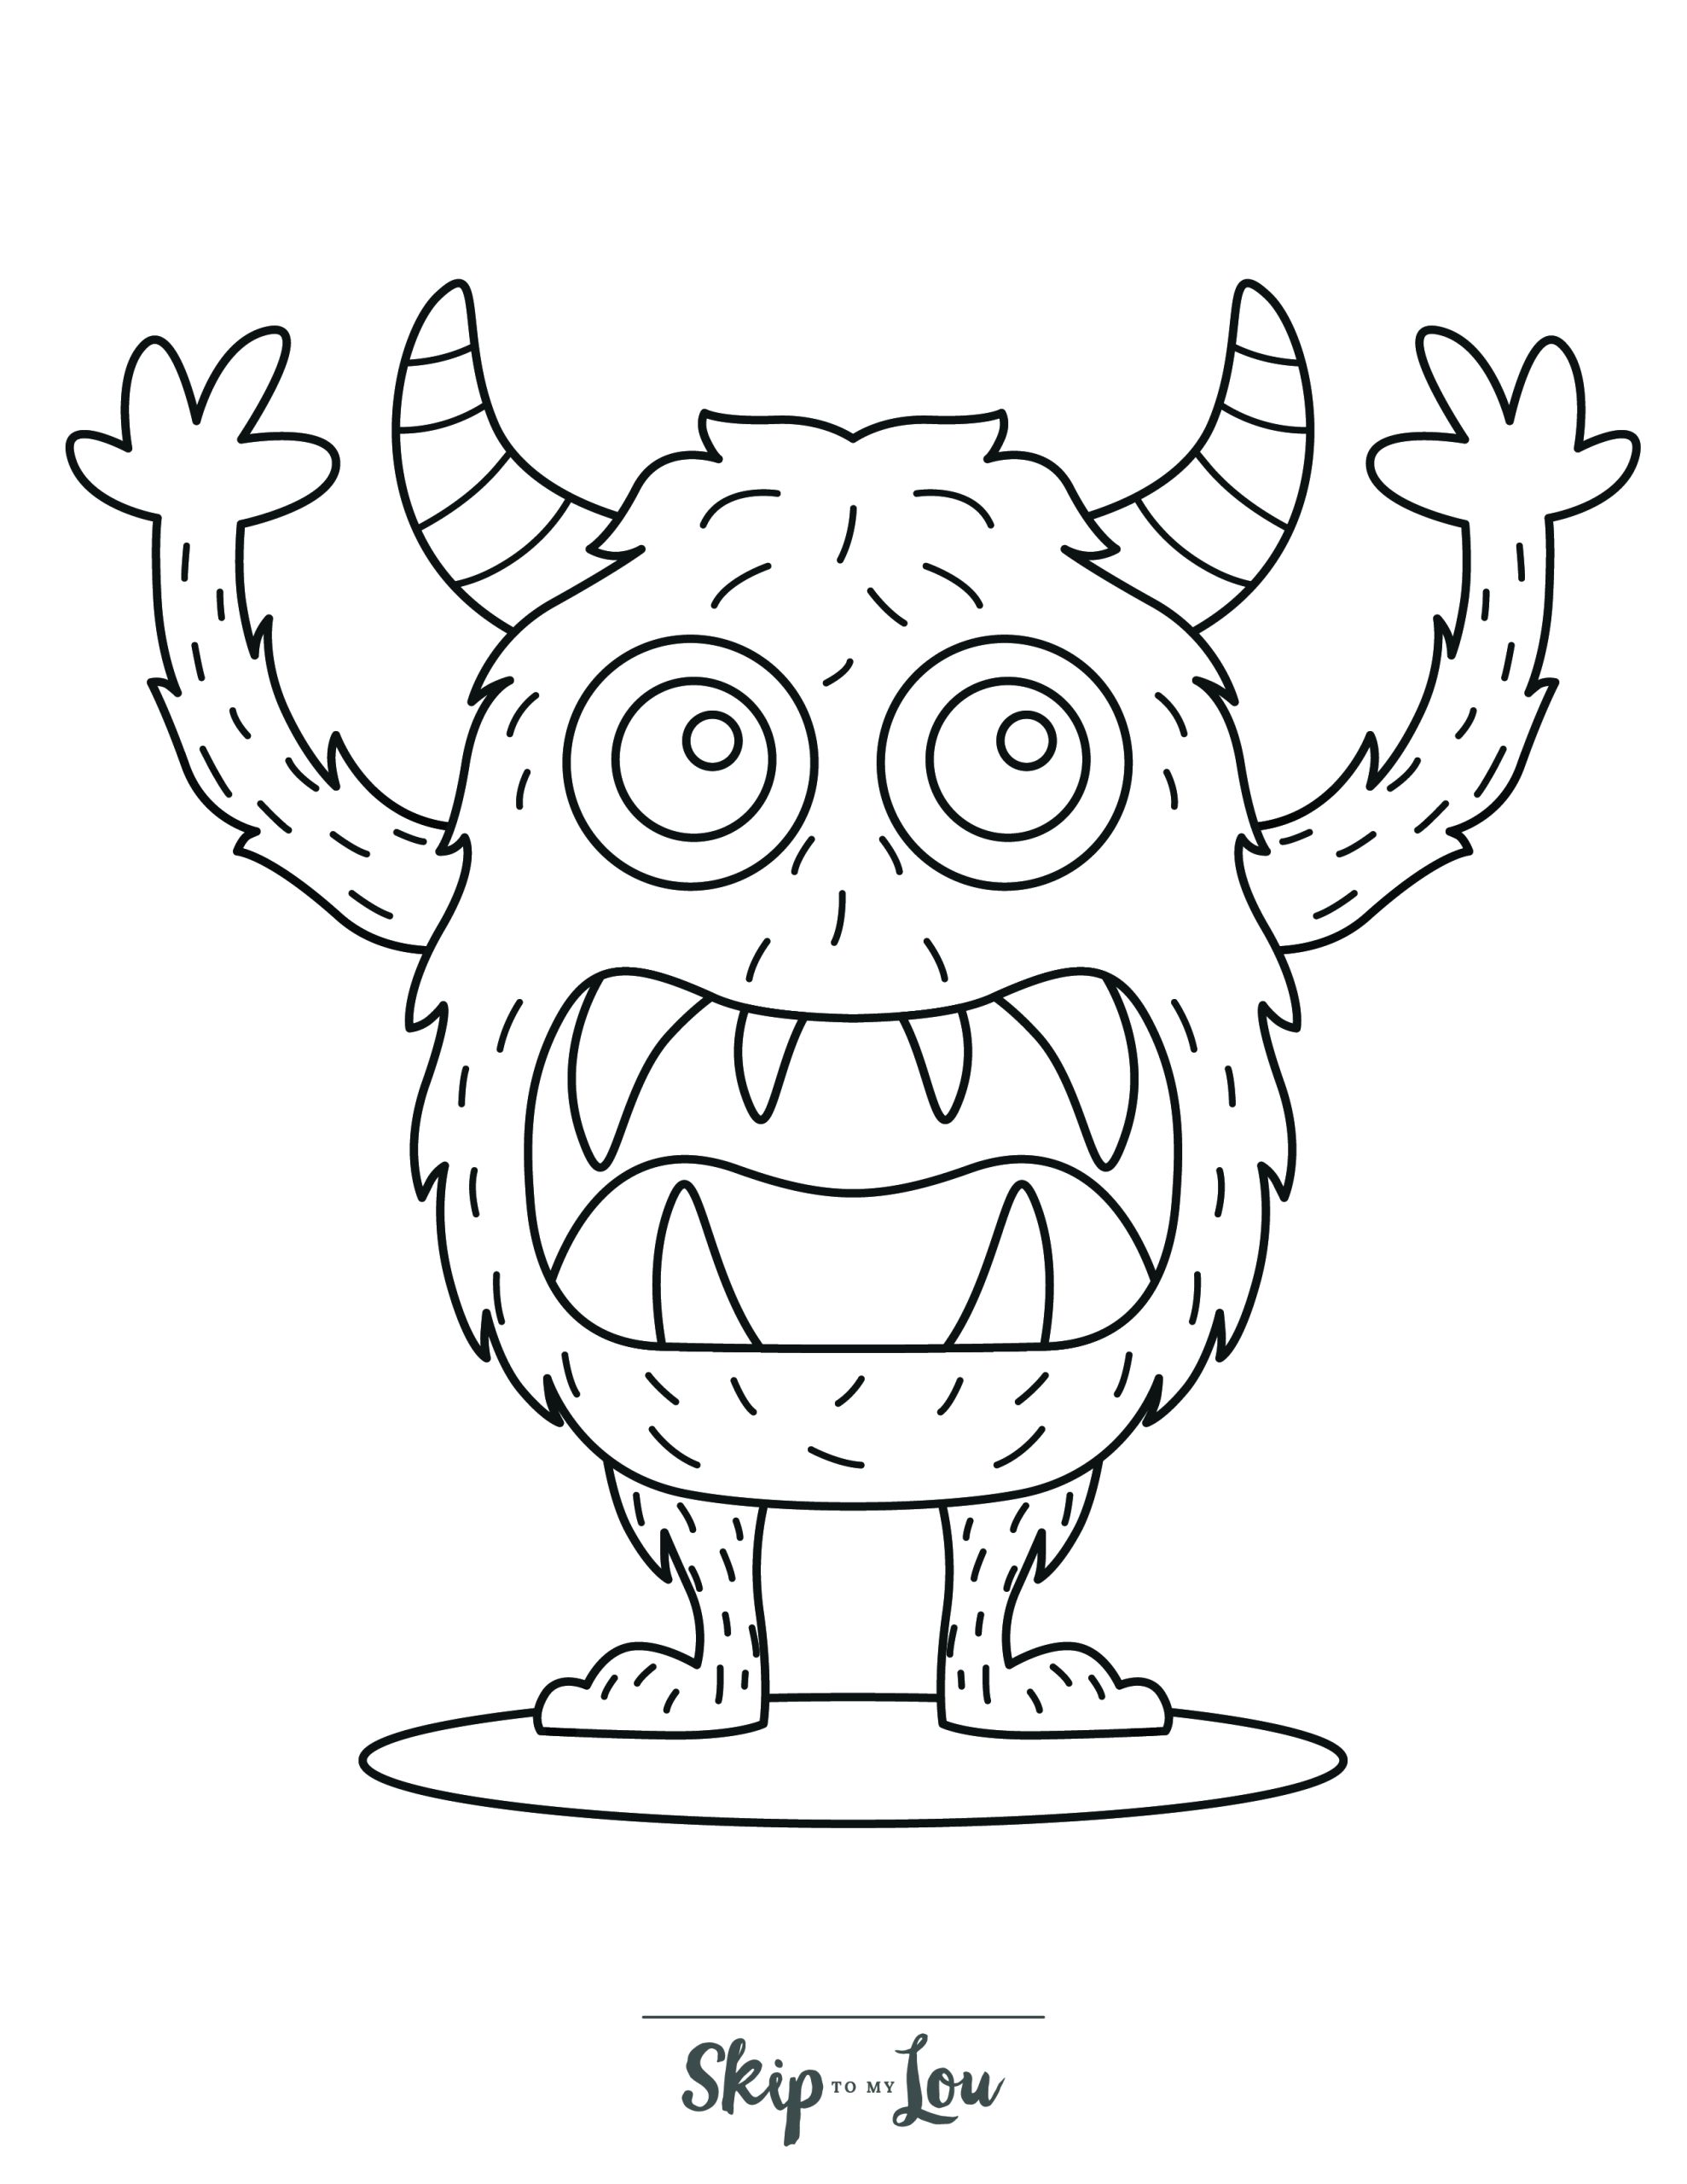 Monster coloring pages free printable monsters for kids skip to my lou